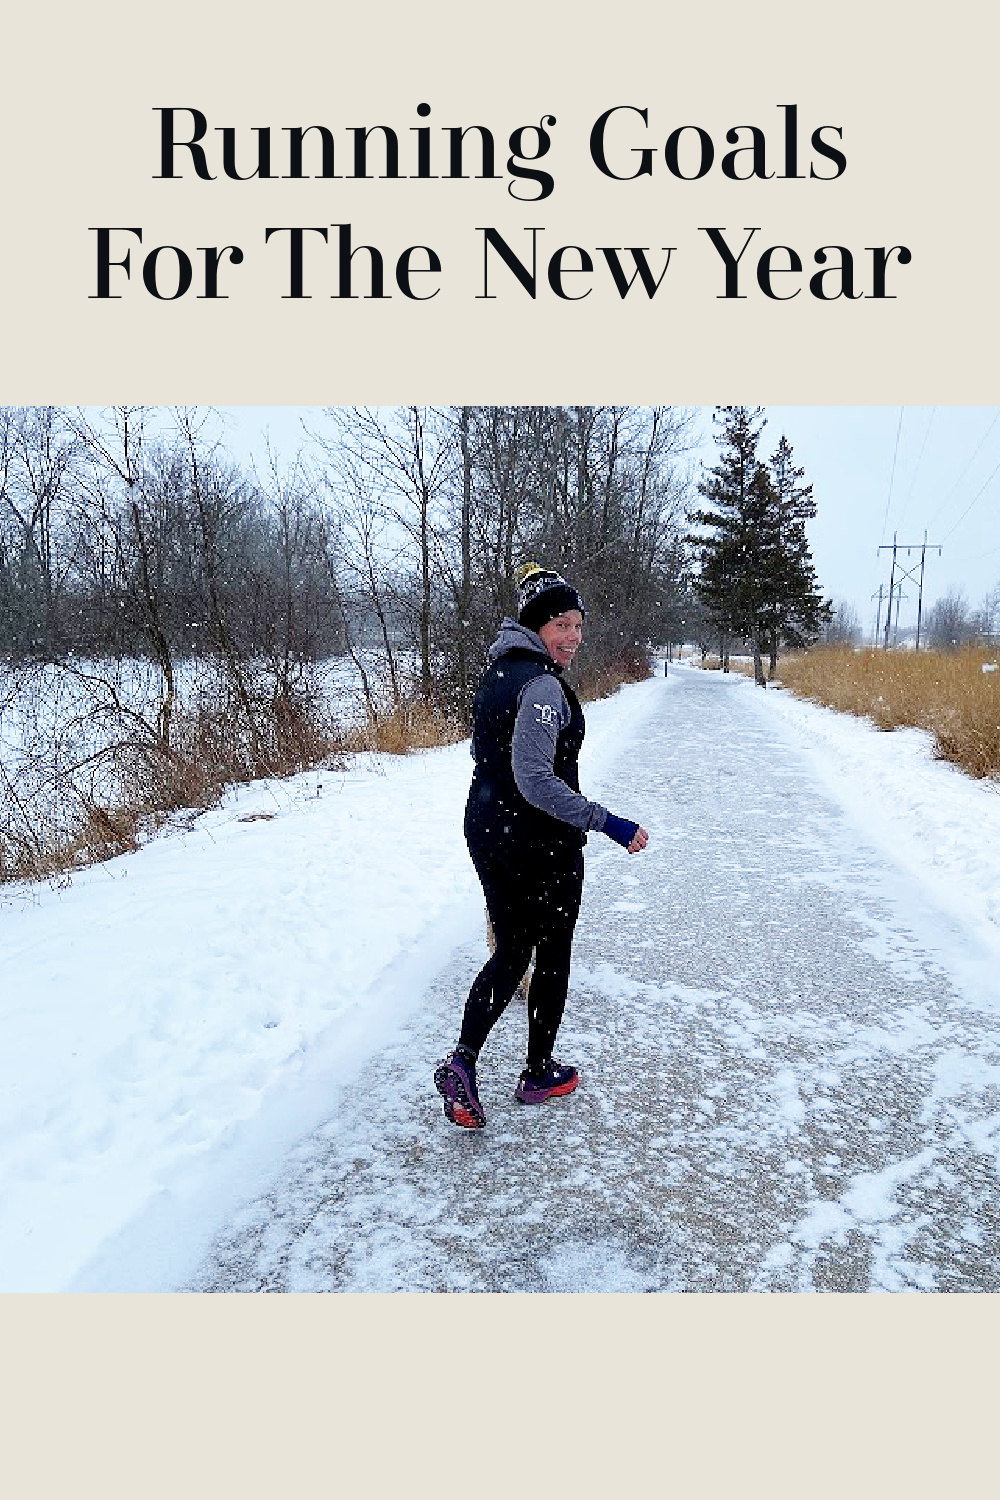 Running Goals for the New Year